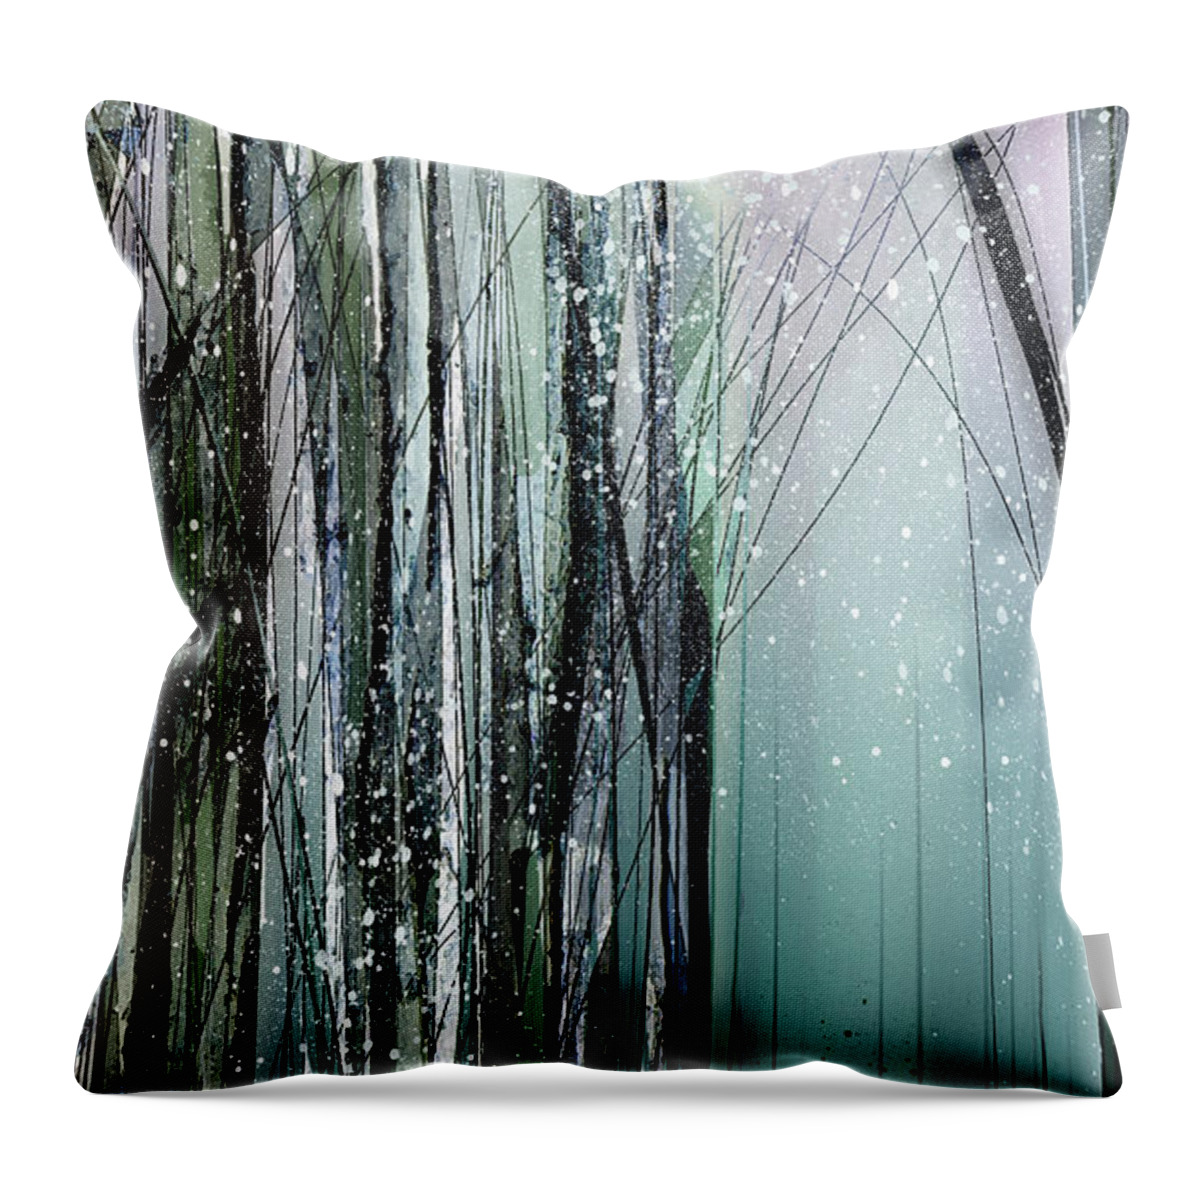 Landscape Throw Pillow featuring the digital art Woodland Night by Gina Harrison